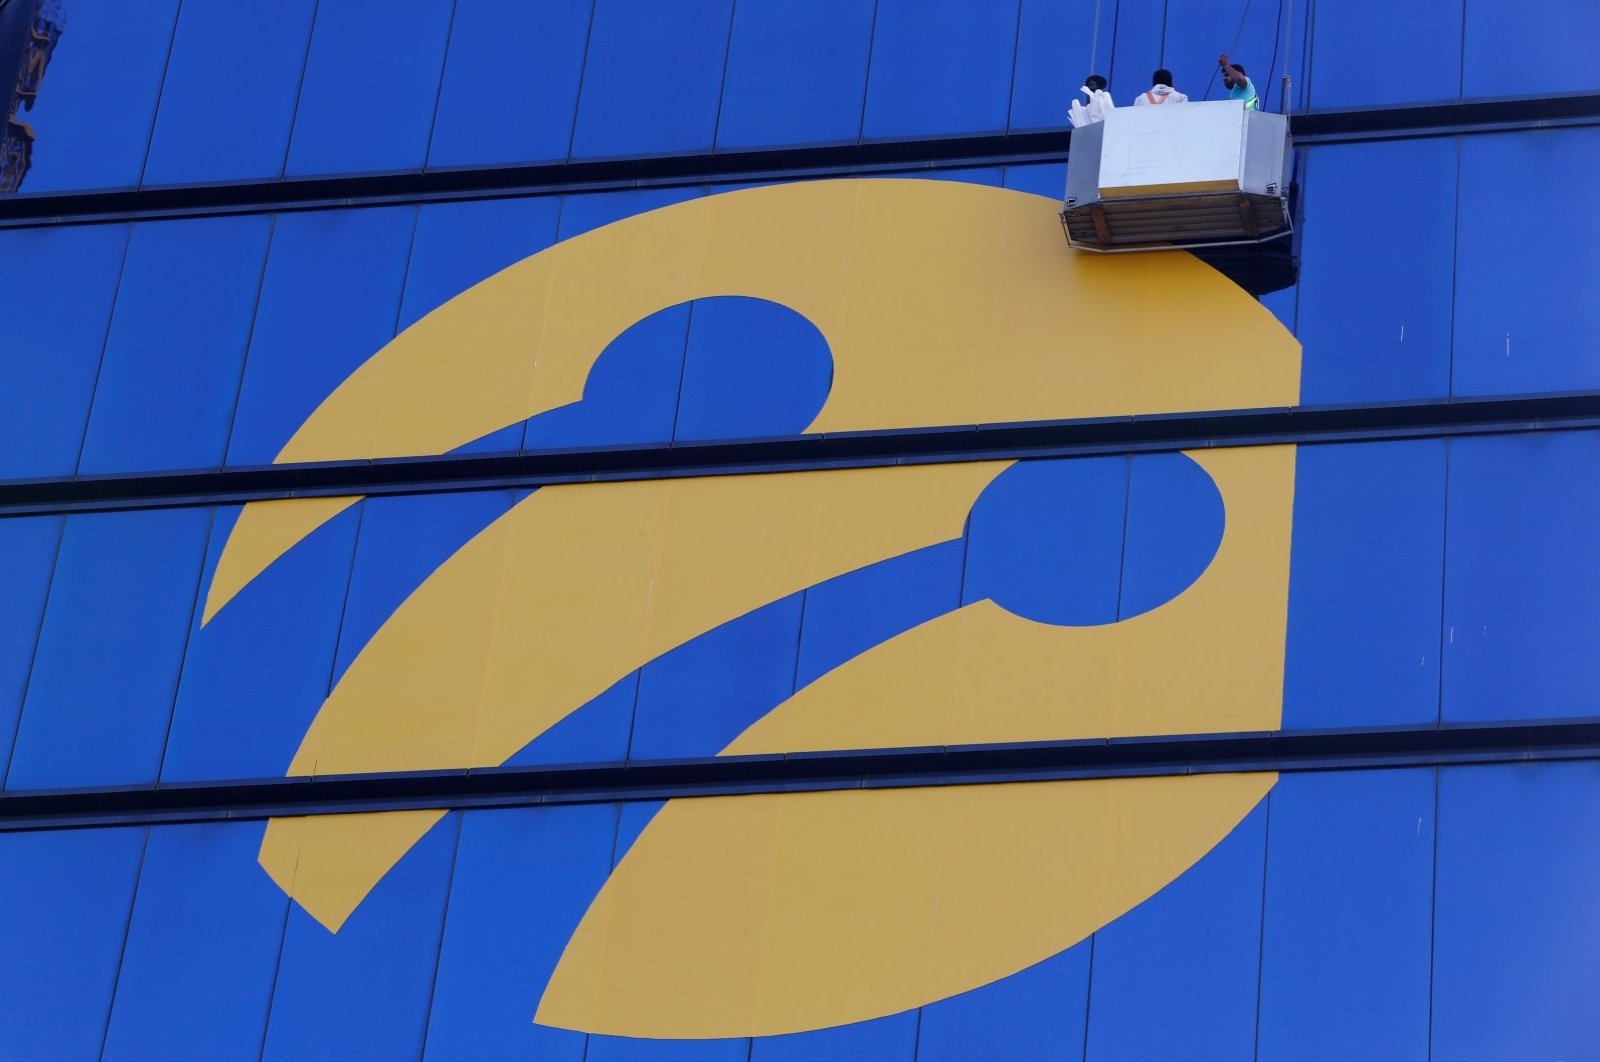 The logo of Turkcell on the Tat Towers in Istanbul, Turkey, June 29, 2016. (Reuters Photo)